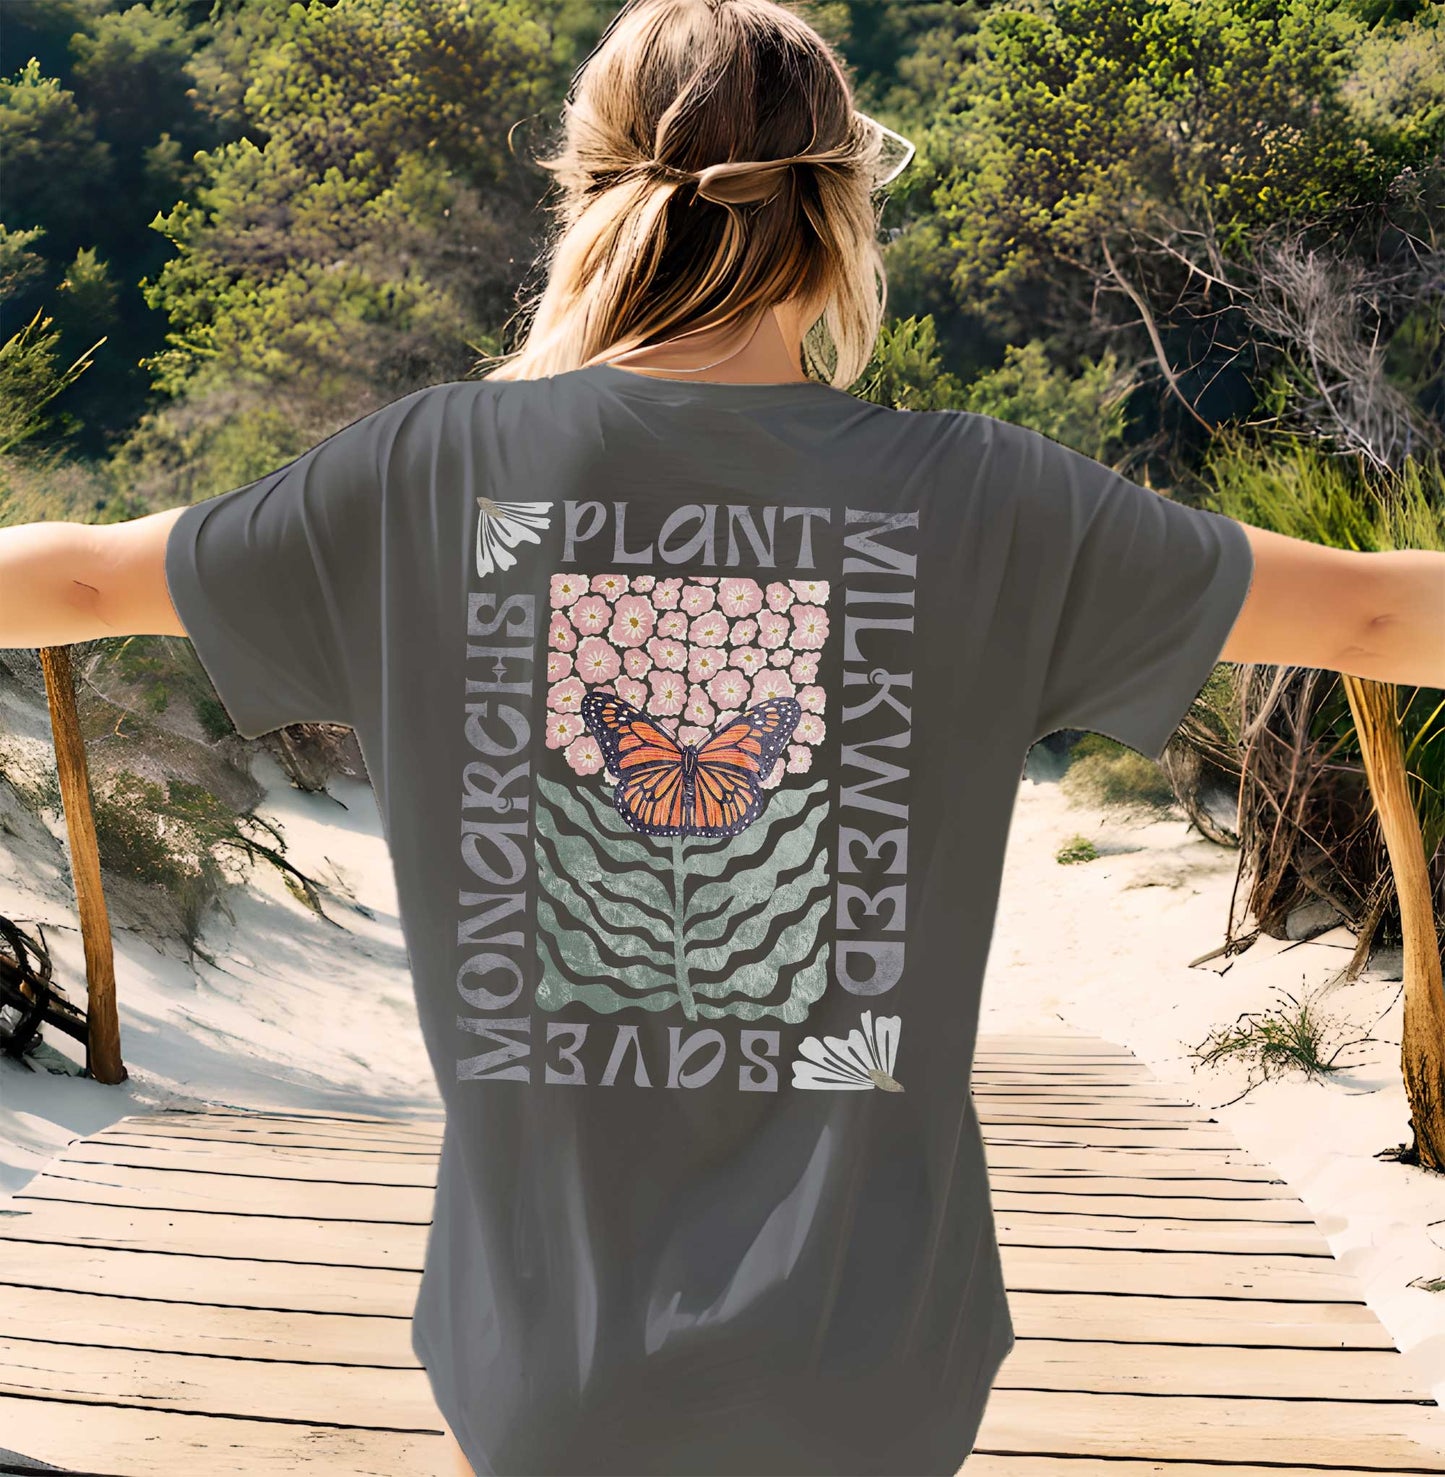 Save the Monarchs Plant Milkweed Conservation shirt. Spread the message about protecting our pollinators with amazing wearable art. 2 sides!